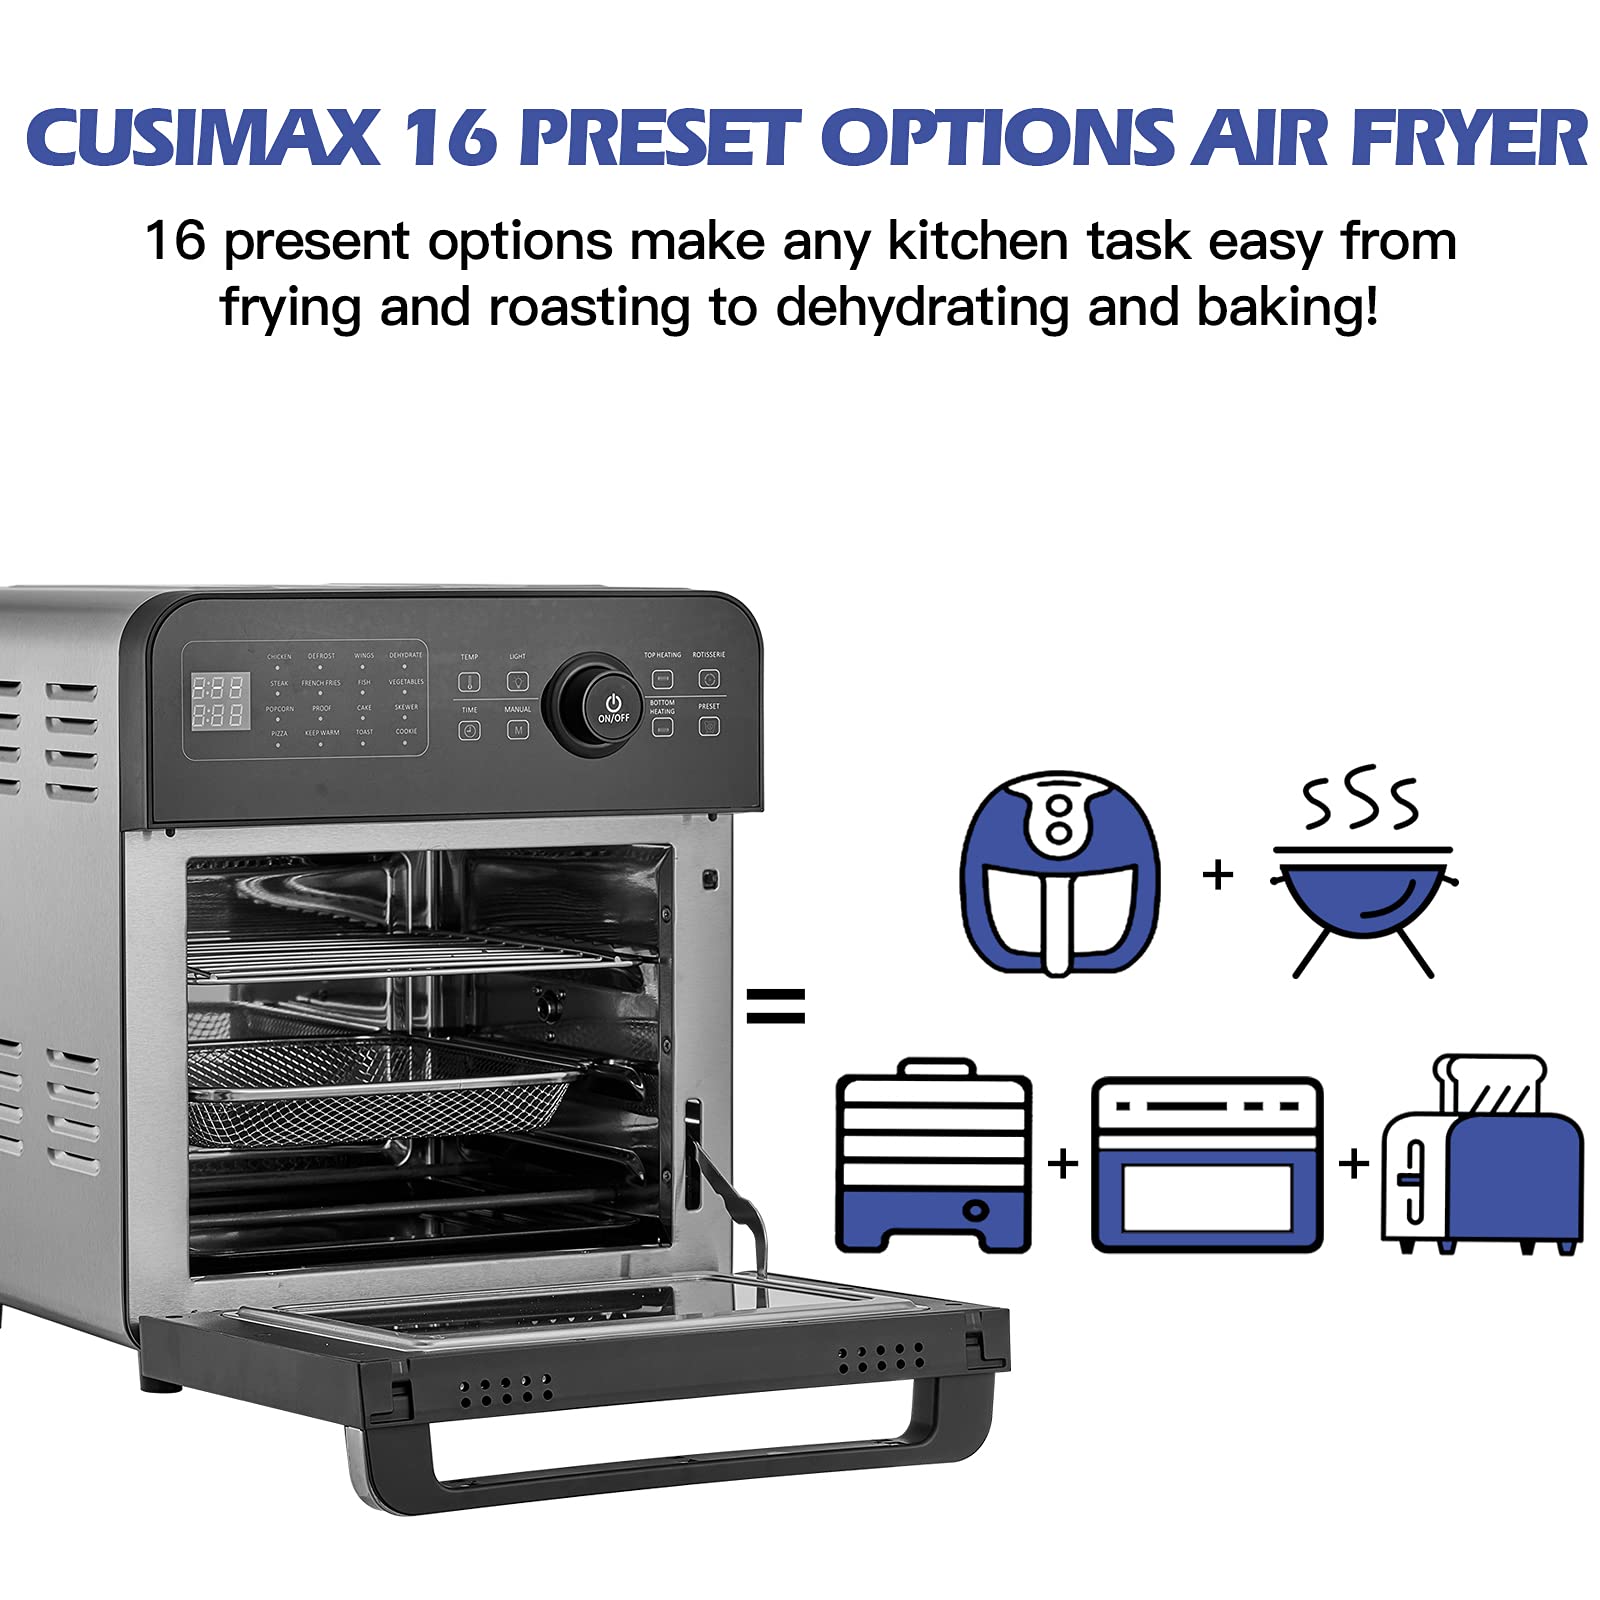 CUSIMAX 3 Layer Shelf Air Fryer Convection Oven 16-in-1 14.7 Liter